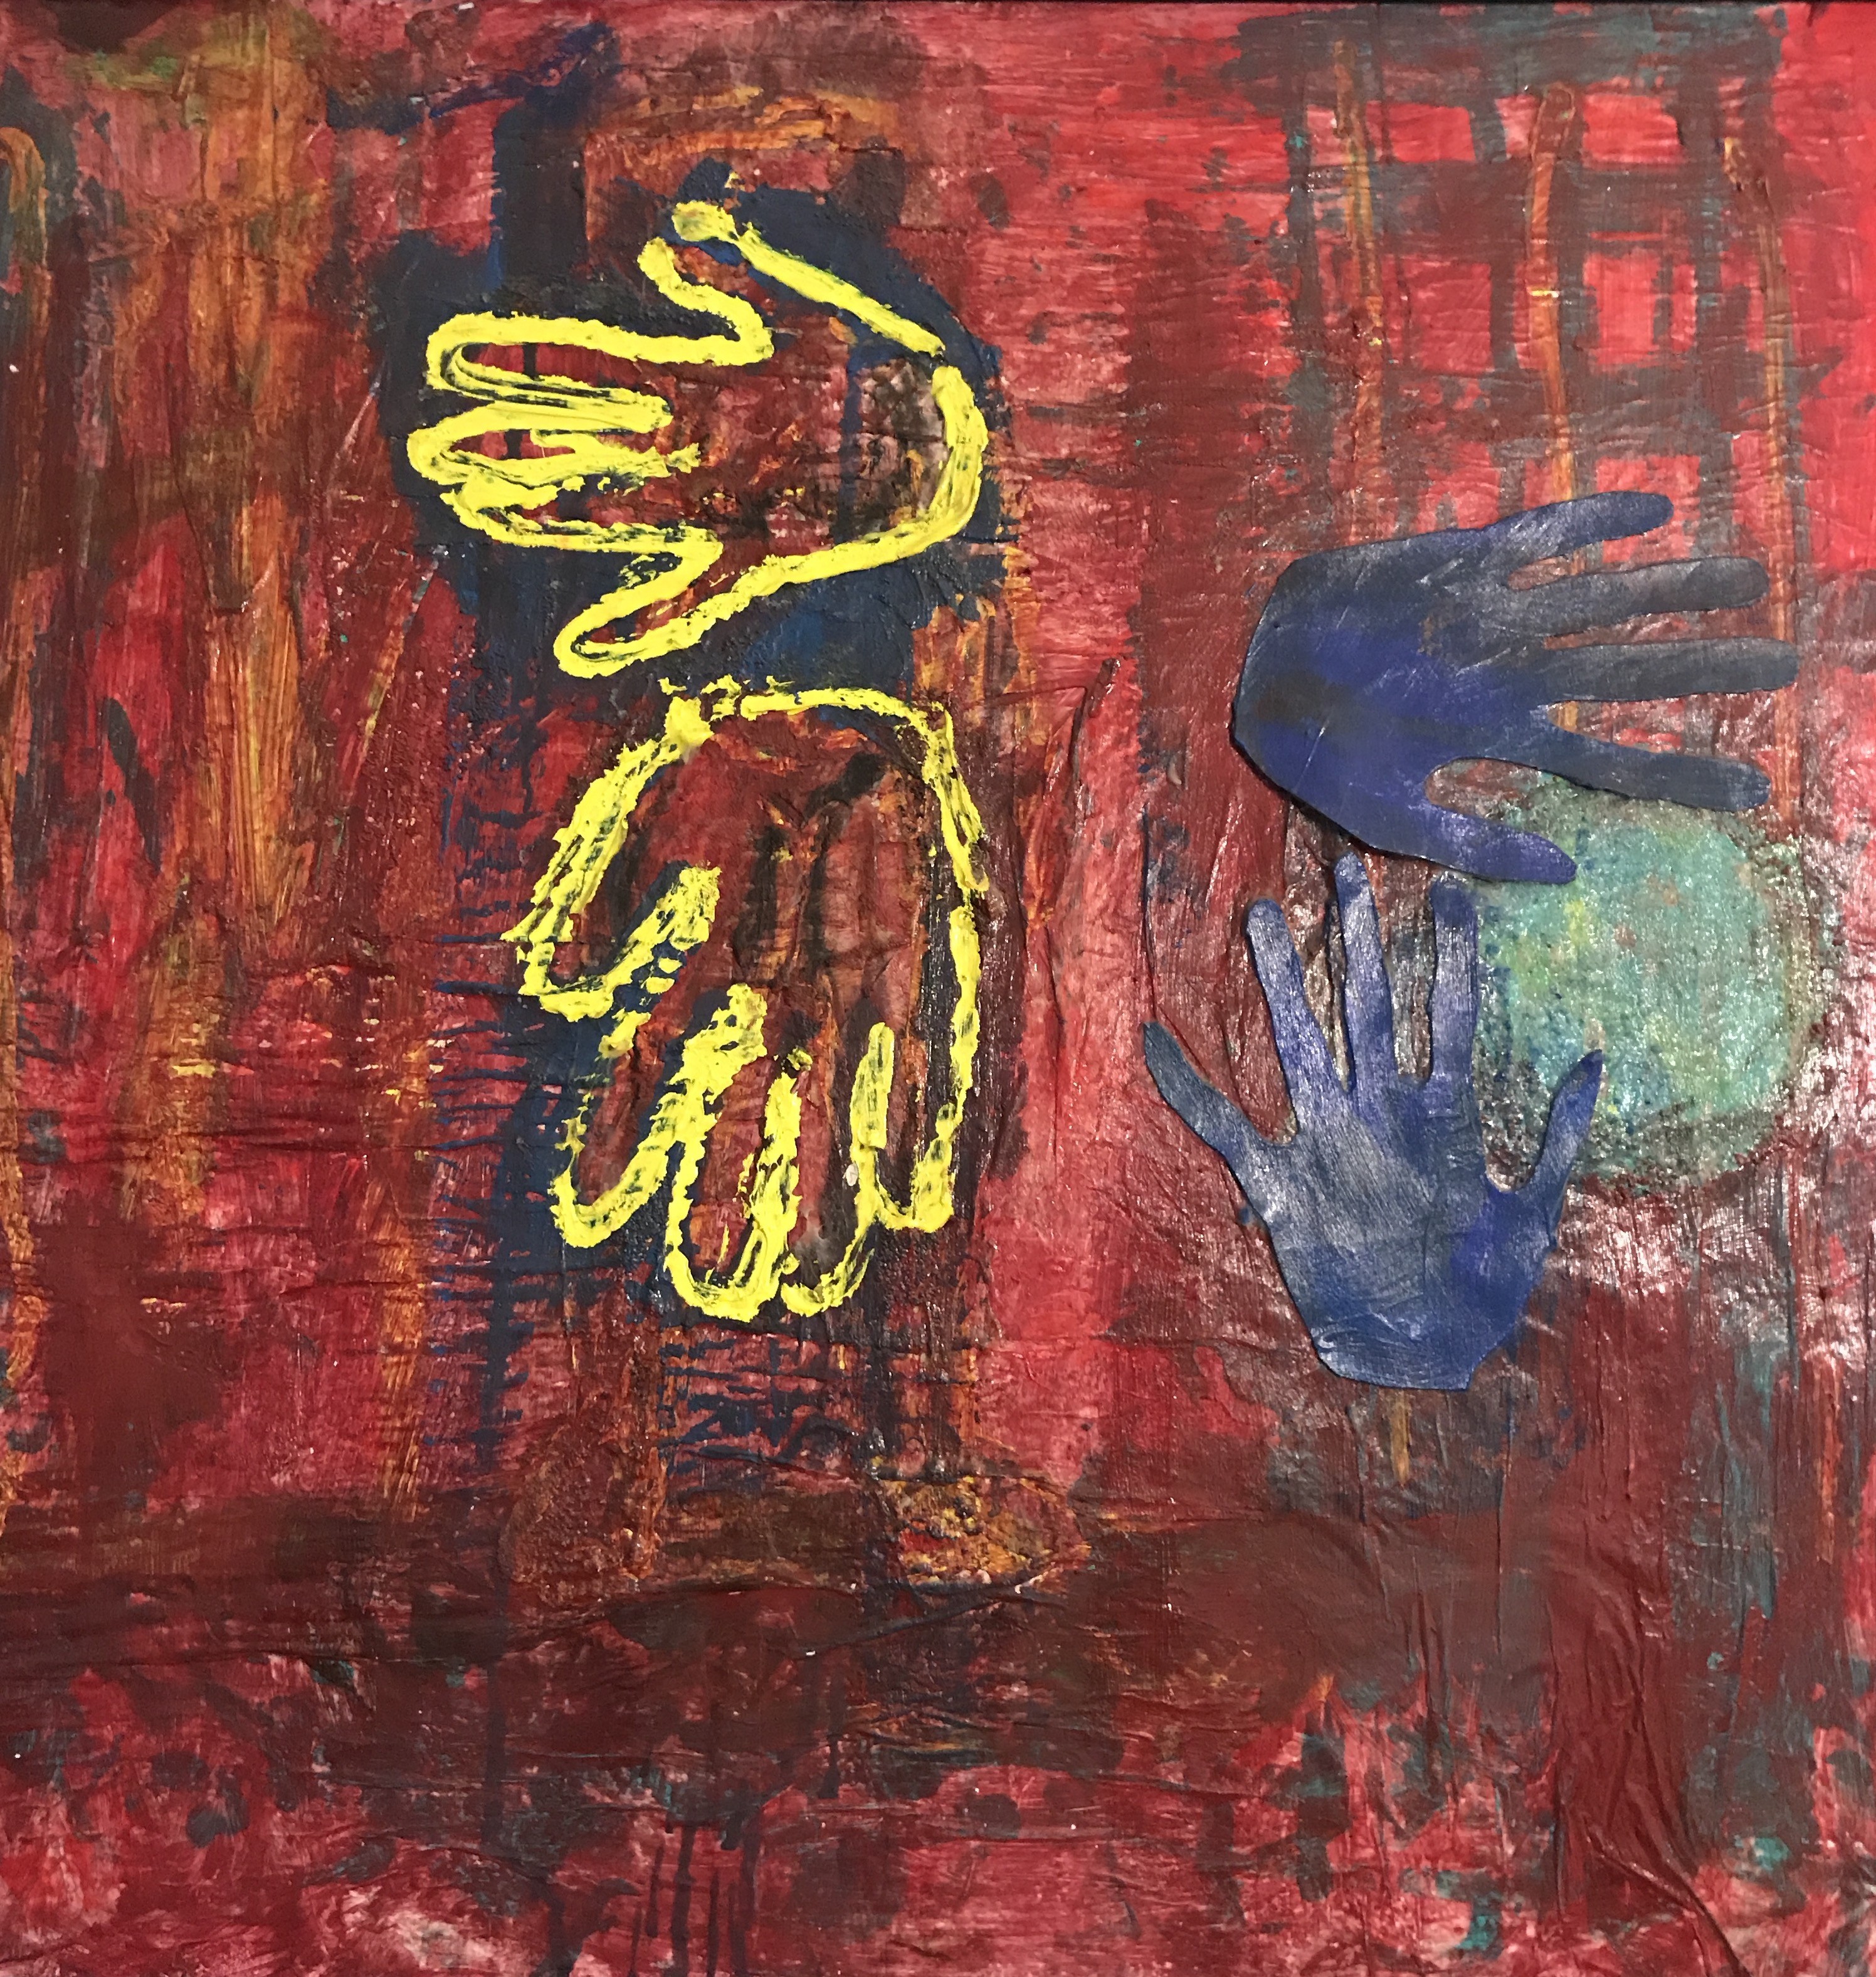 painting with red background, yellow and blue hands